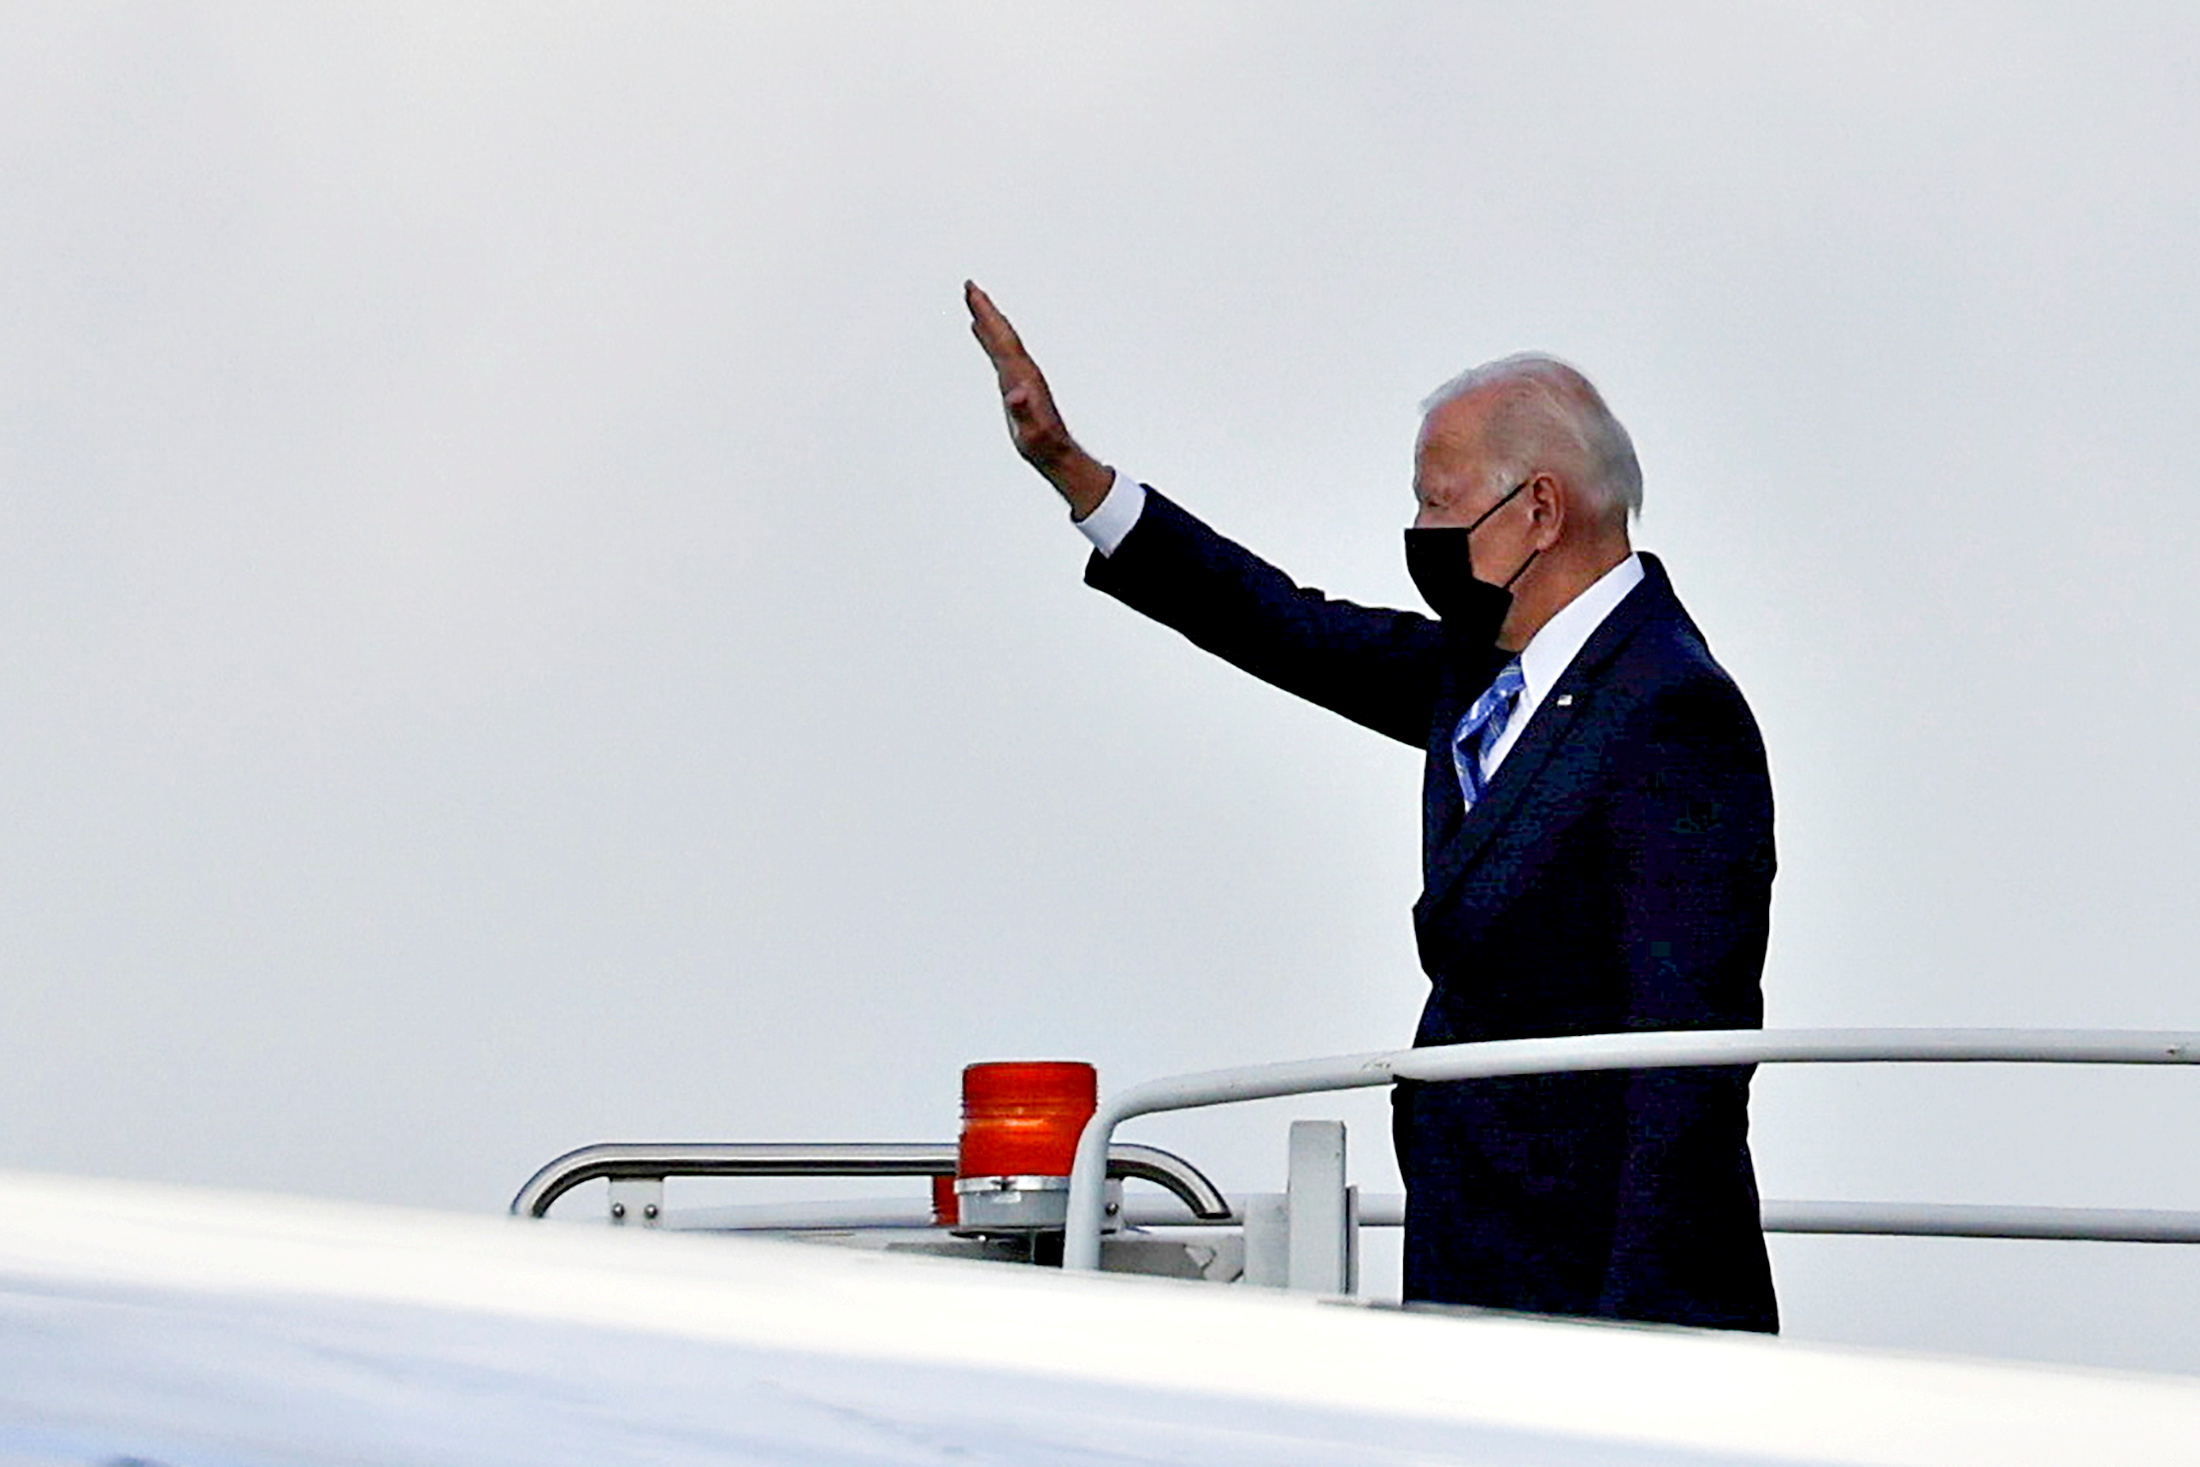 U.S. President Joe Biden waves as he boards Air Force One to depart O'Hare International Airport in Chicago, Illinois, U.S., October 7, 2021. REUTERS/Evelyn Hockstein